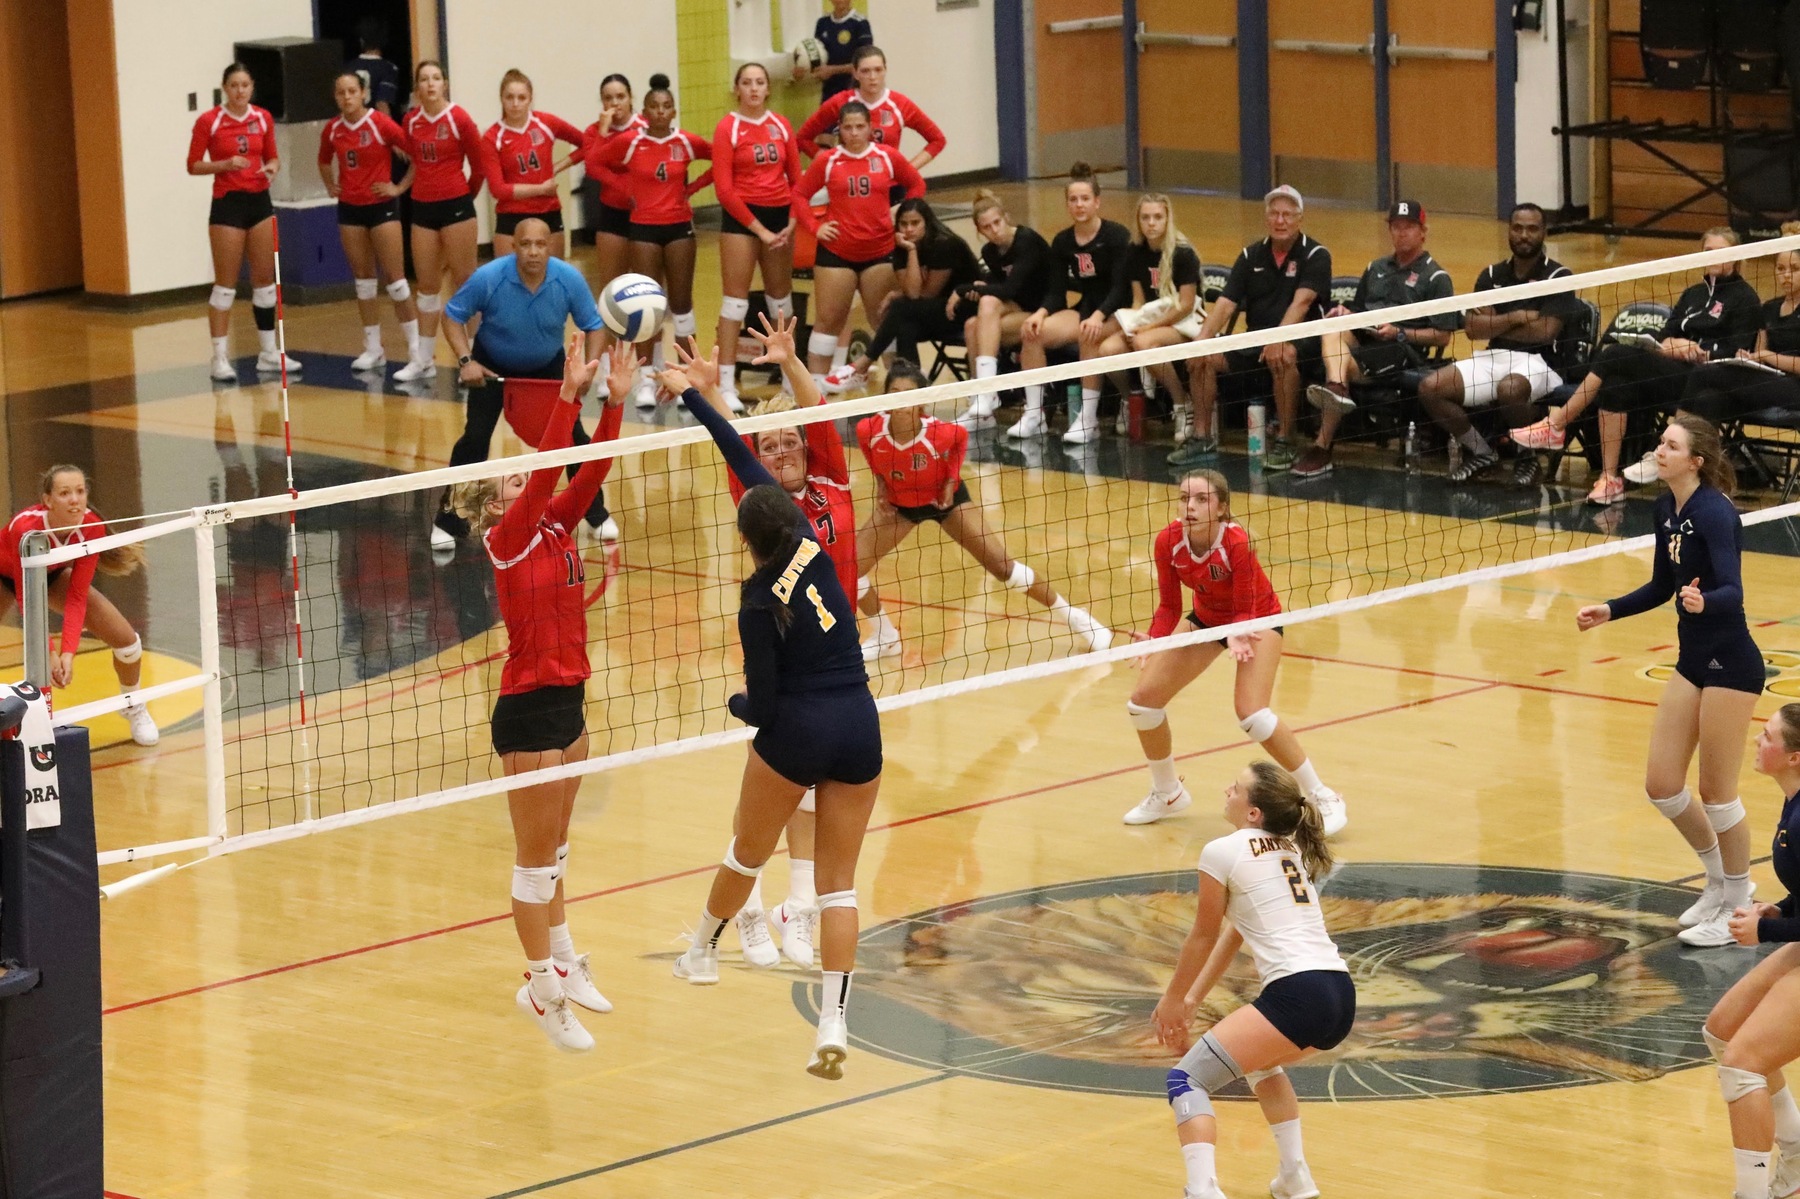 College of the Canyons sophomore outside hitter Shayla Johnson goes up for the kill during the Lady Cougars' 3-0 sweep over No. 4 Long Beach City College on Sept. 12, at the Cougar Cage. Jacob Velarde/COC Sports Information.